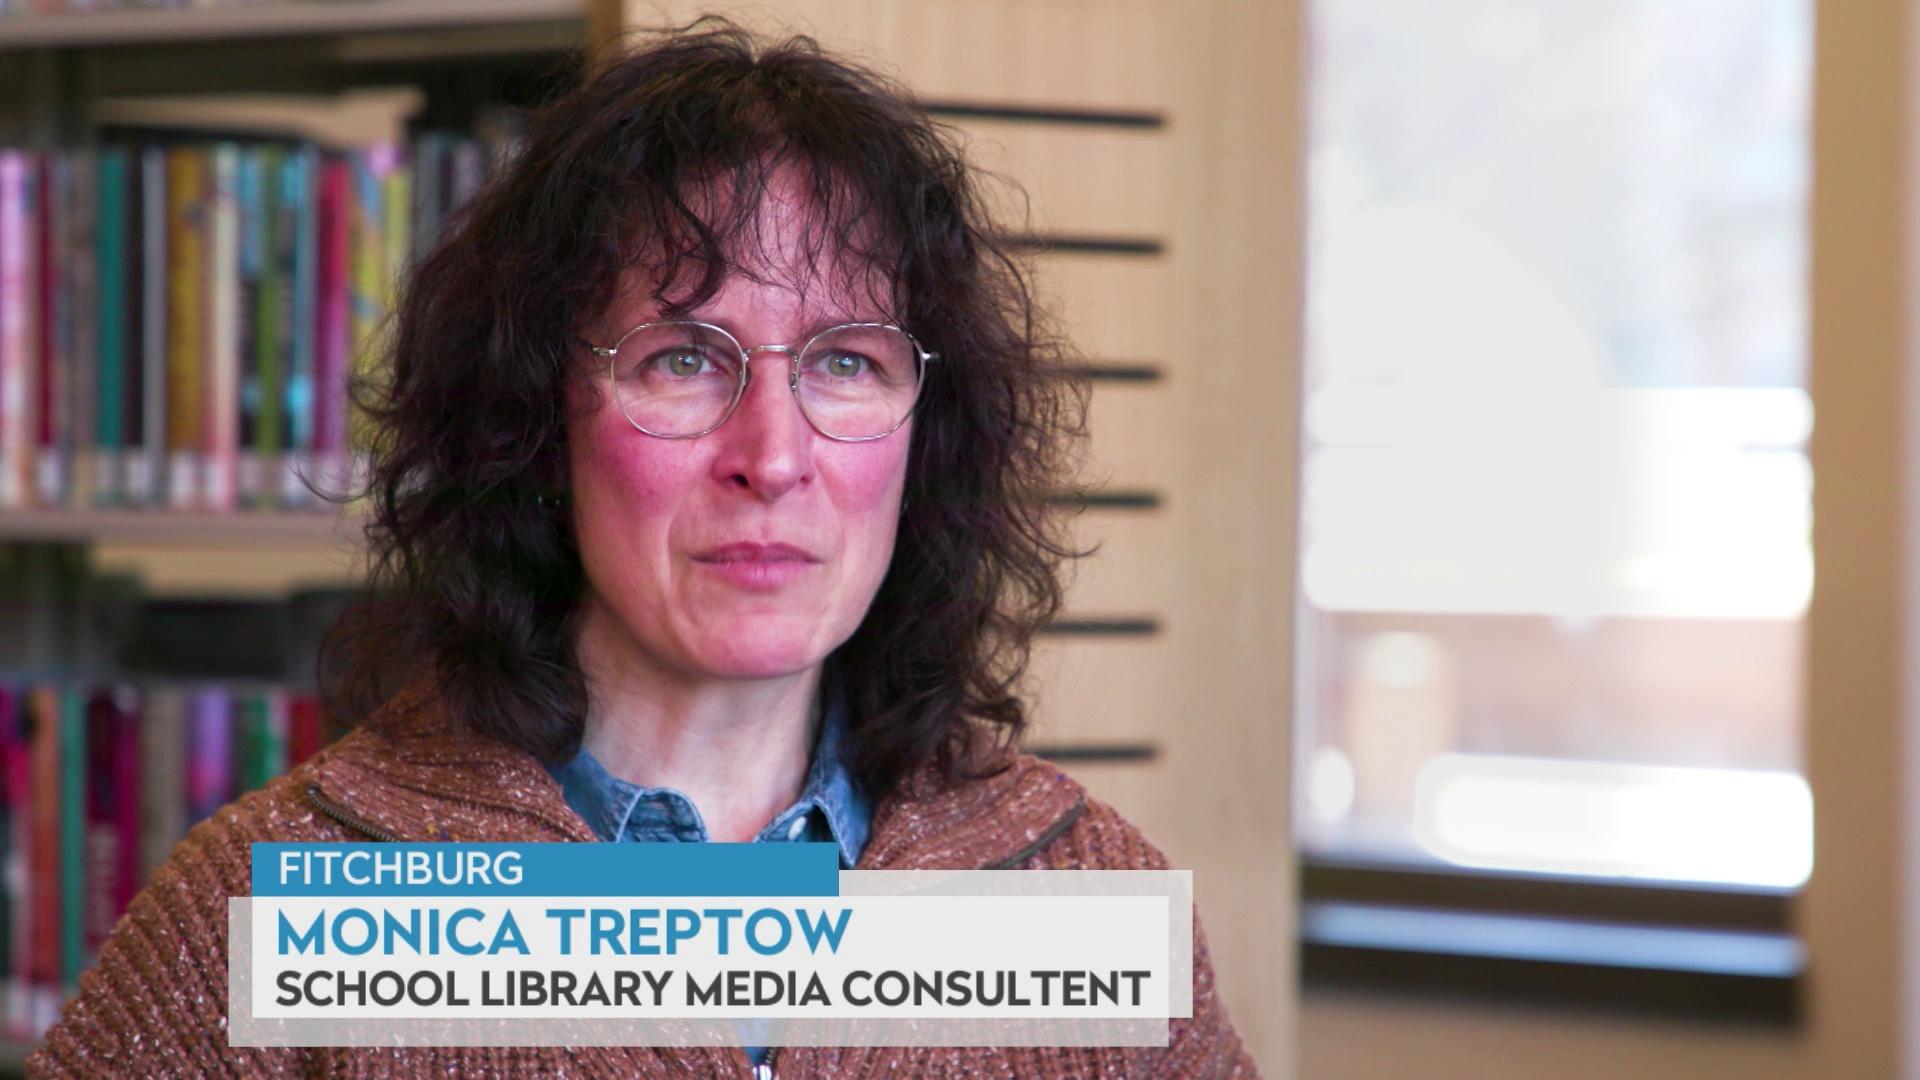 Monica Treptow on literacy and resources in school libraries